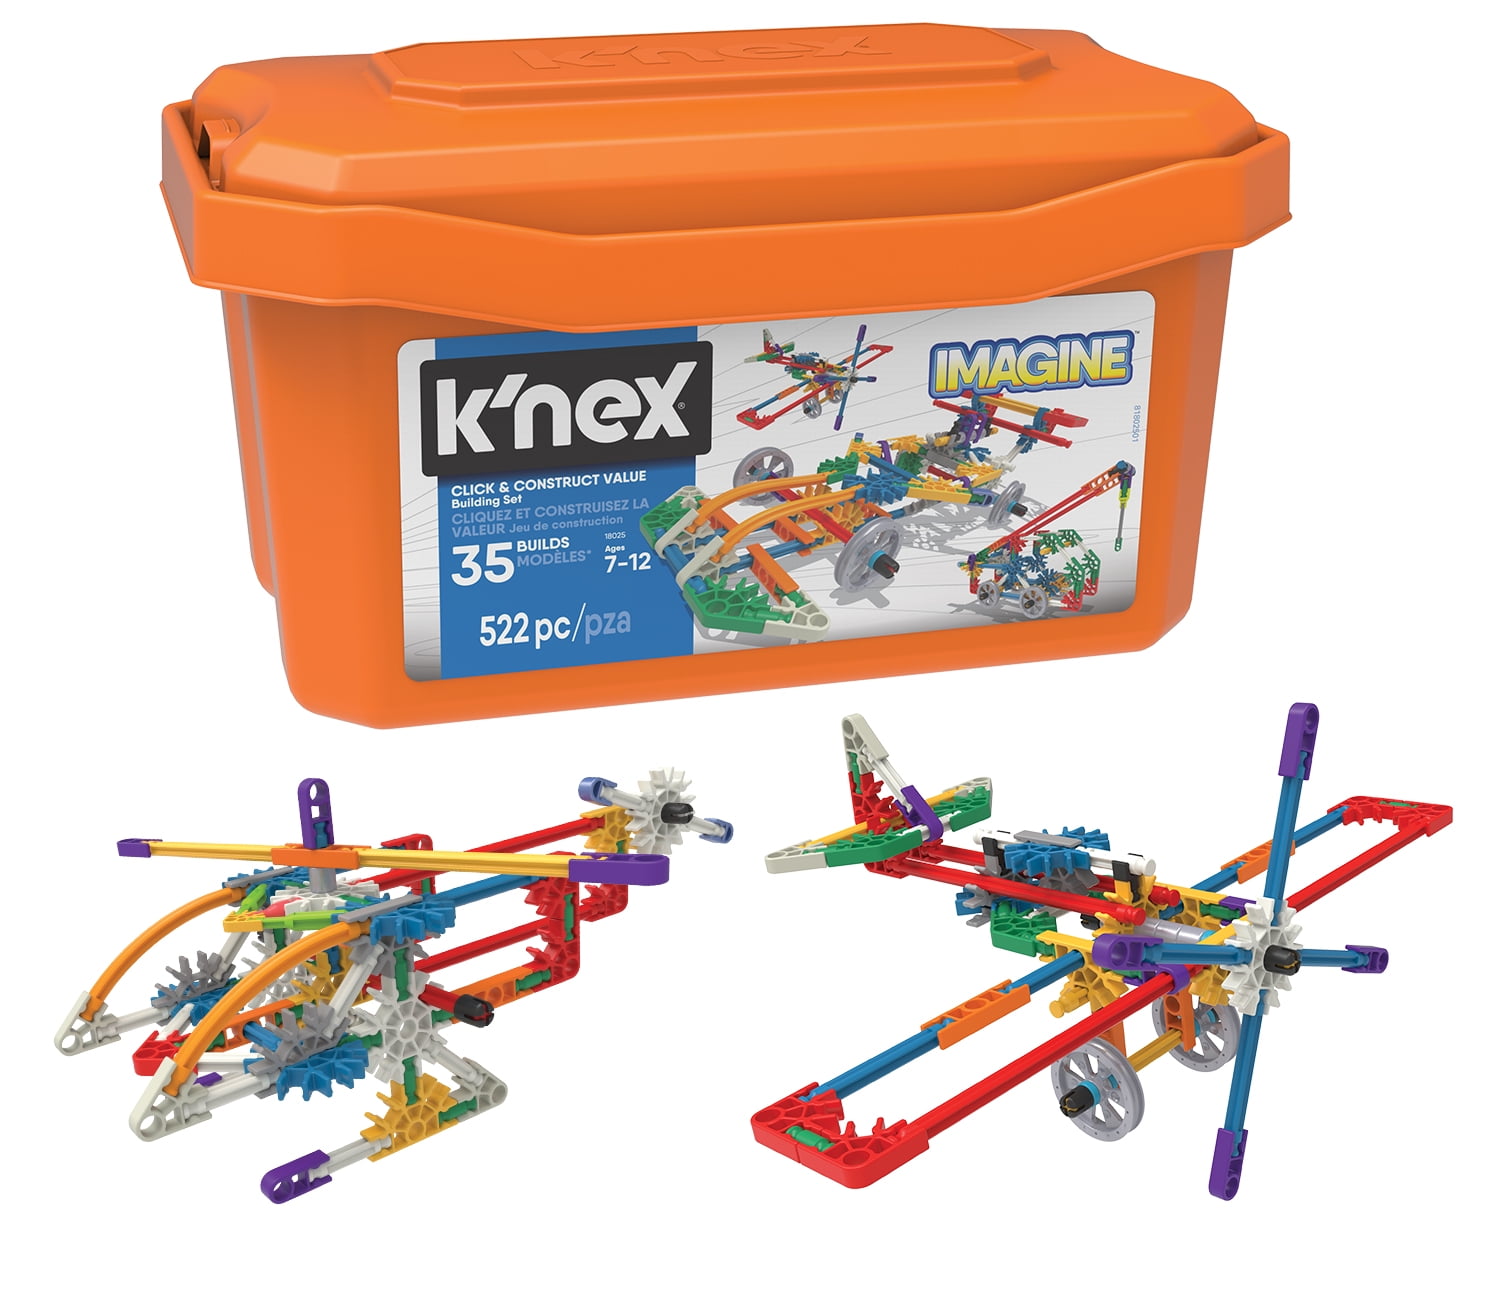 NEW! K'nex 35 Model Ultimate Building Set FREE SHIPPING! PERFECT GIFT 